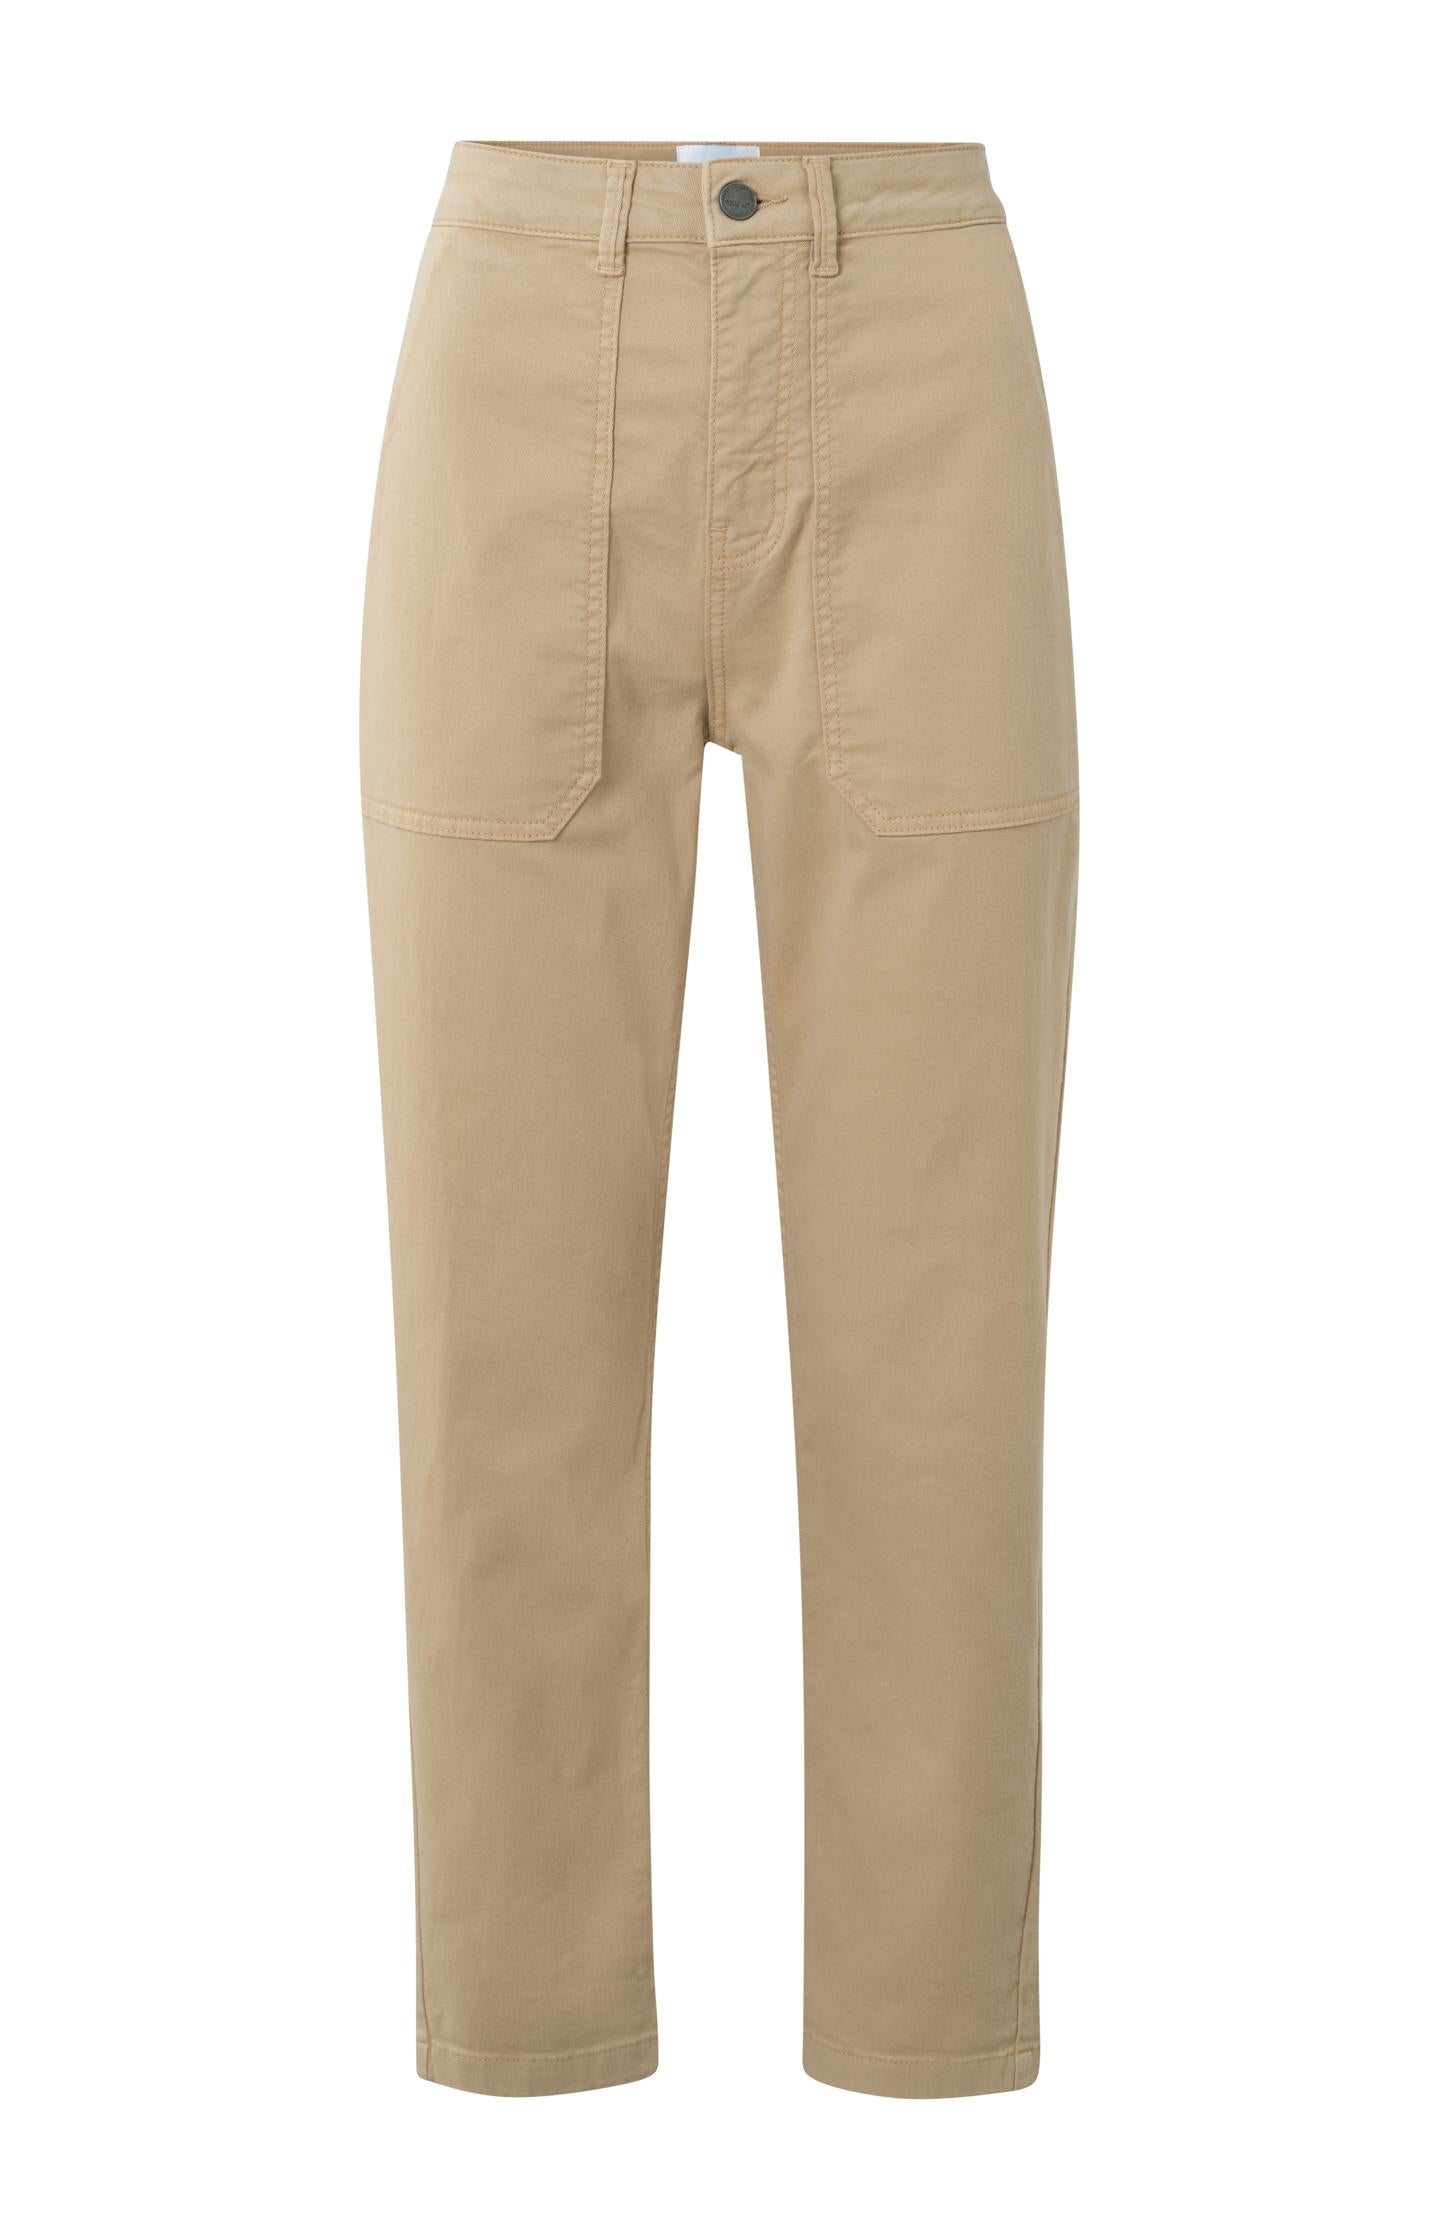 Cargo trousers with pockets and a zip fly in loose fit - Type: product